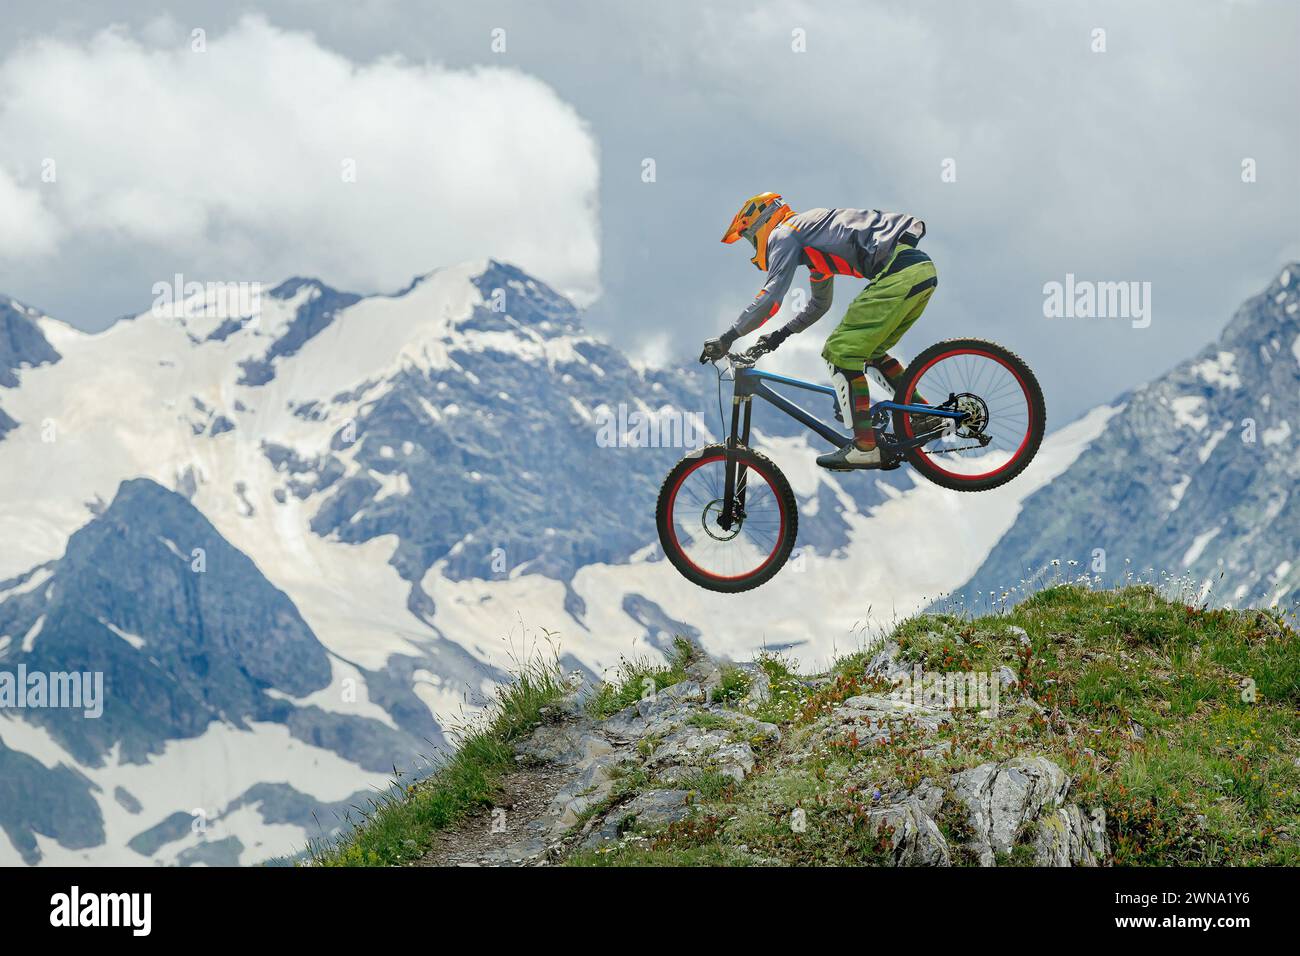 Mountain biker defies gravity, soaring mid-air against backdrop of snow-capped peaks and lush greenery. Ideal for adventure, sports, and nature themes Stock Photo